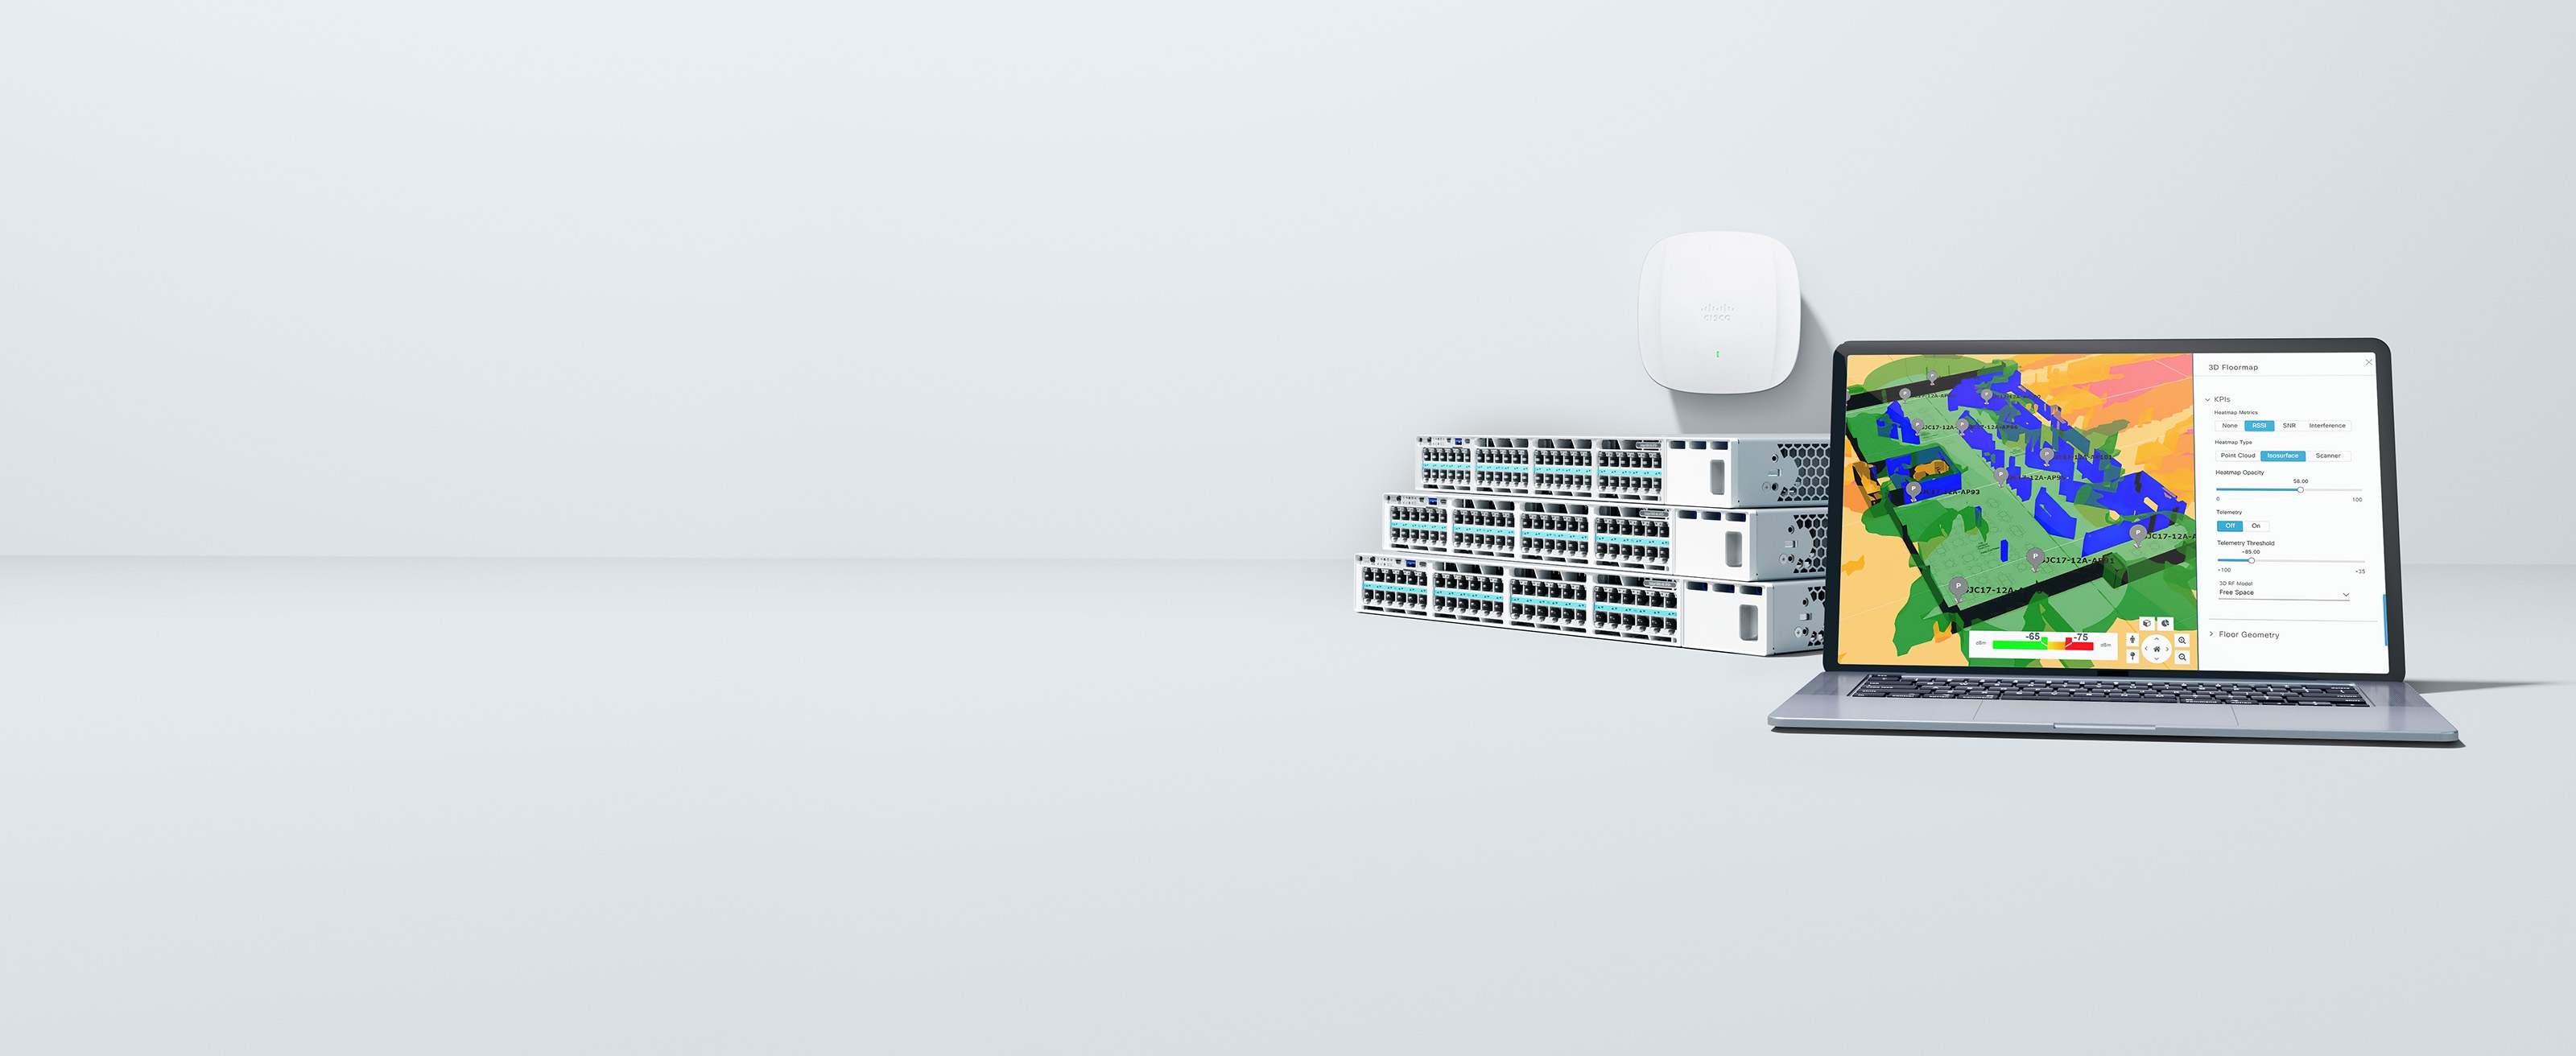 Wired and wireless Catalyst 9000 switches and access point with Cisco Catalyst Center